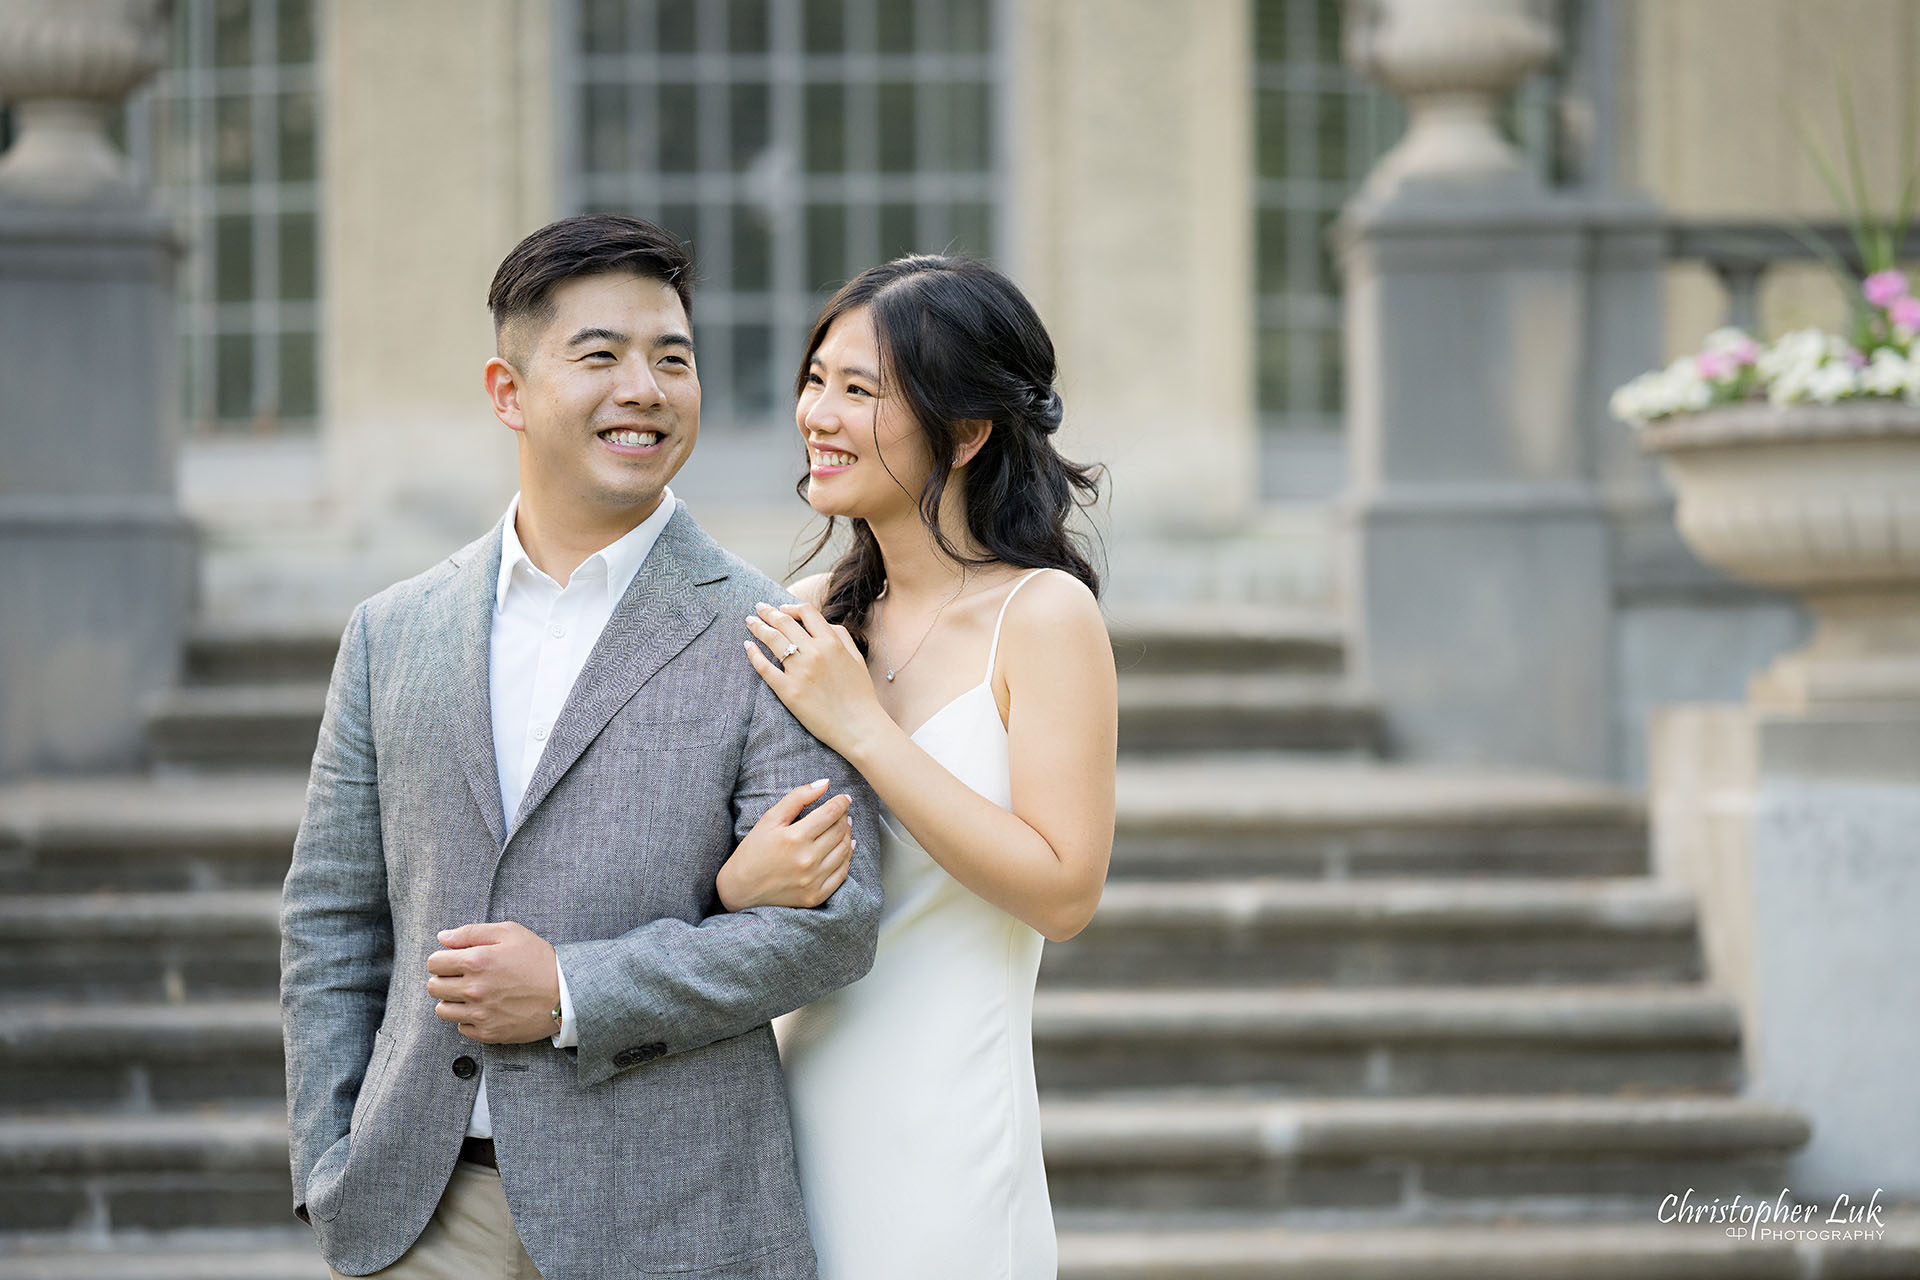 Parkwood Estate Bride Groom Engagement Session Main Lawn Garden Landscape Photojournalistic Candid Natural Organic Hug Interacting Linking Arms Smile Laugh Happy 